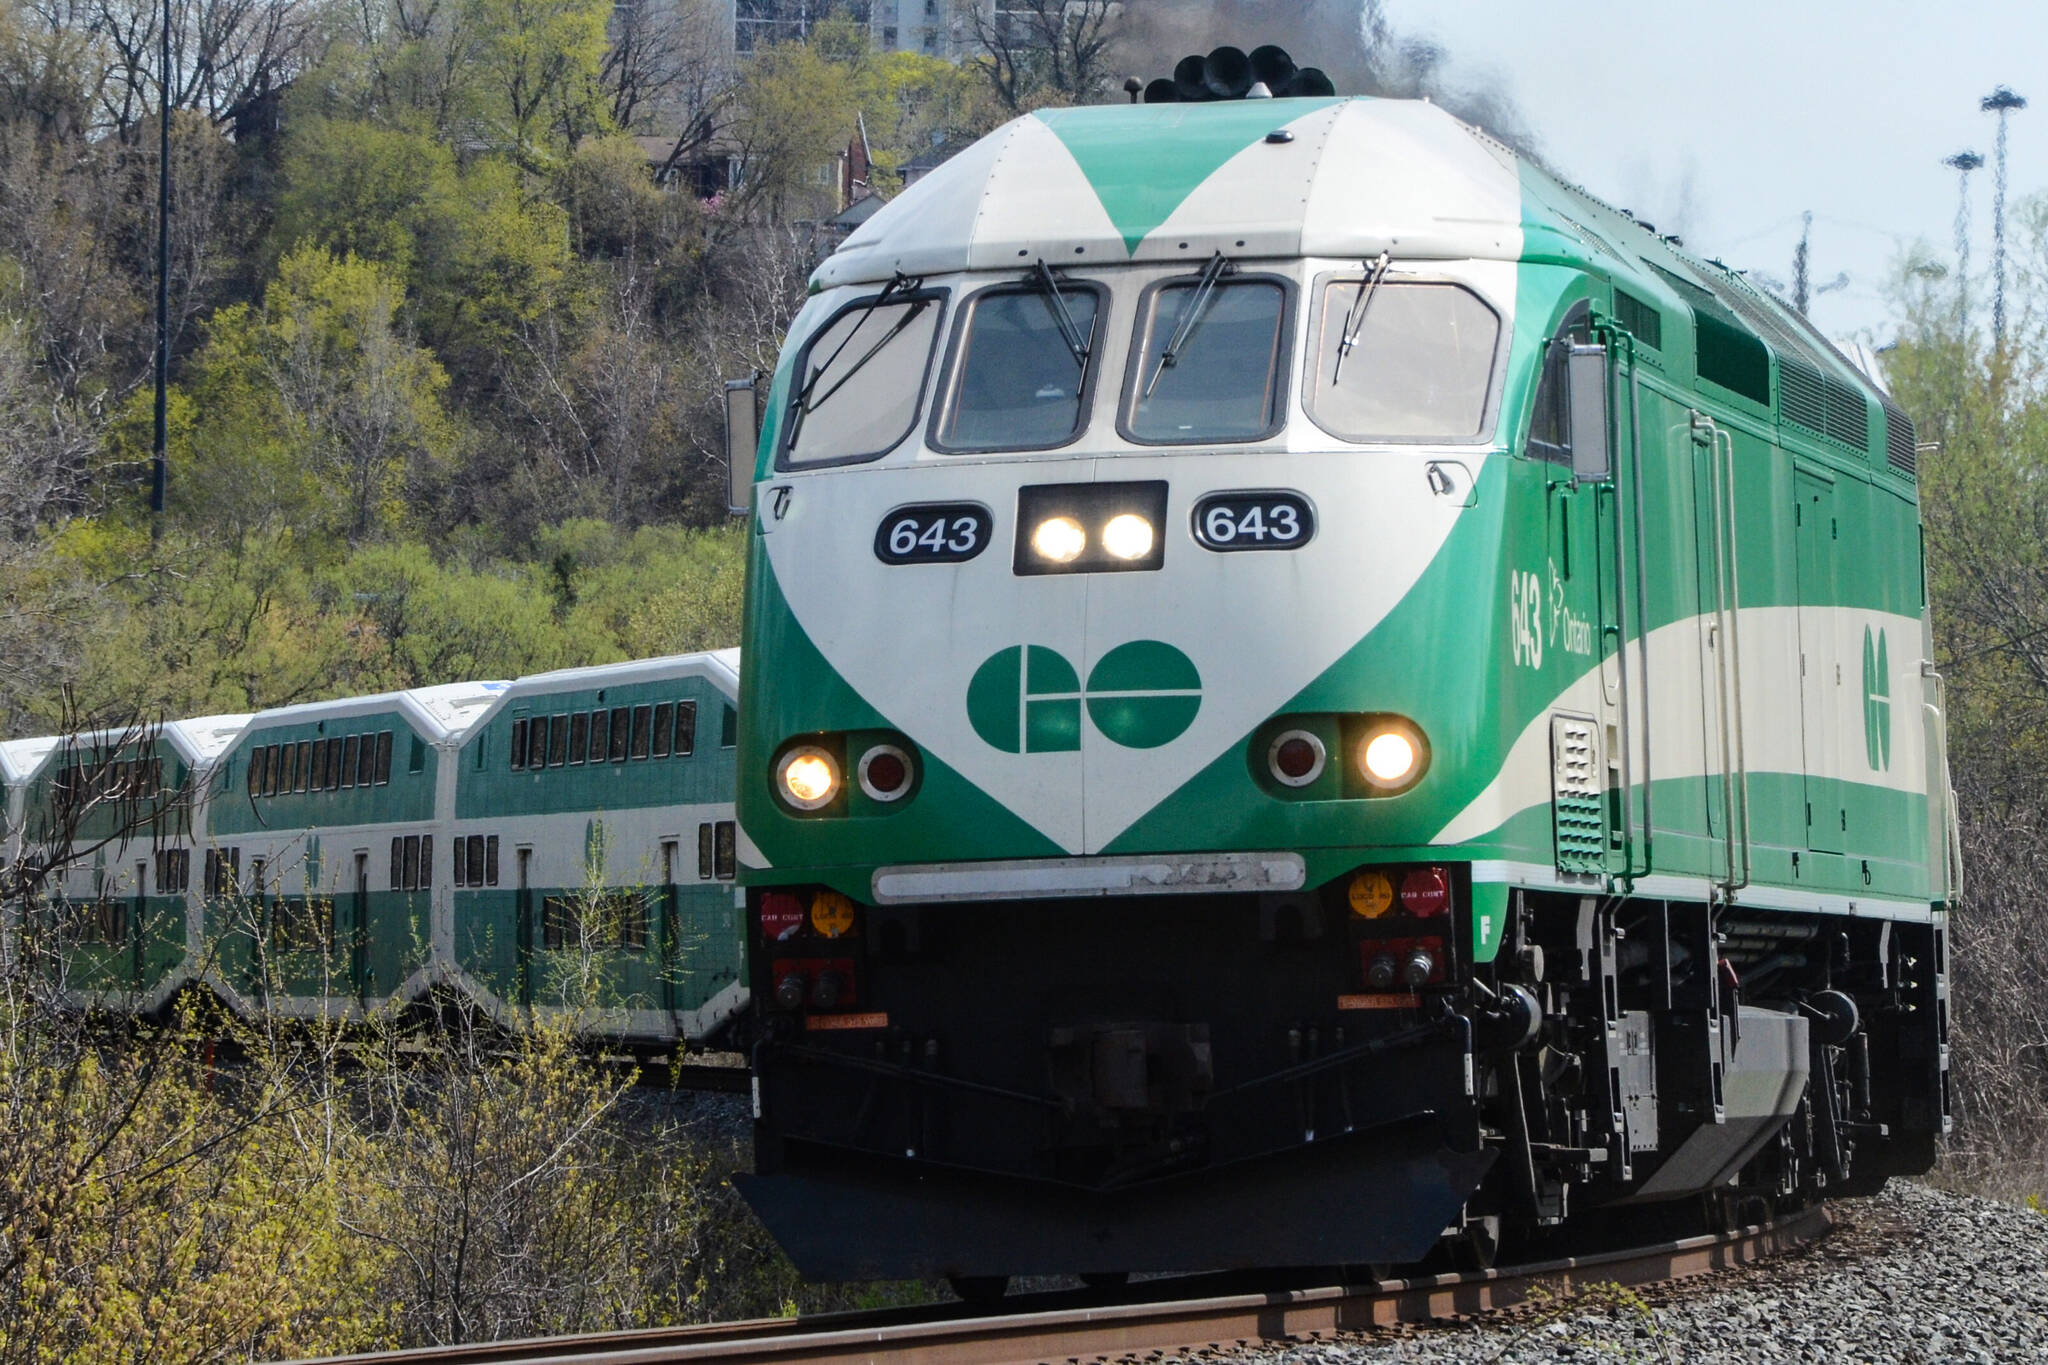 GO Transit is offering unlimited rides on Sundays for 10